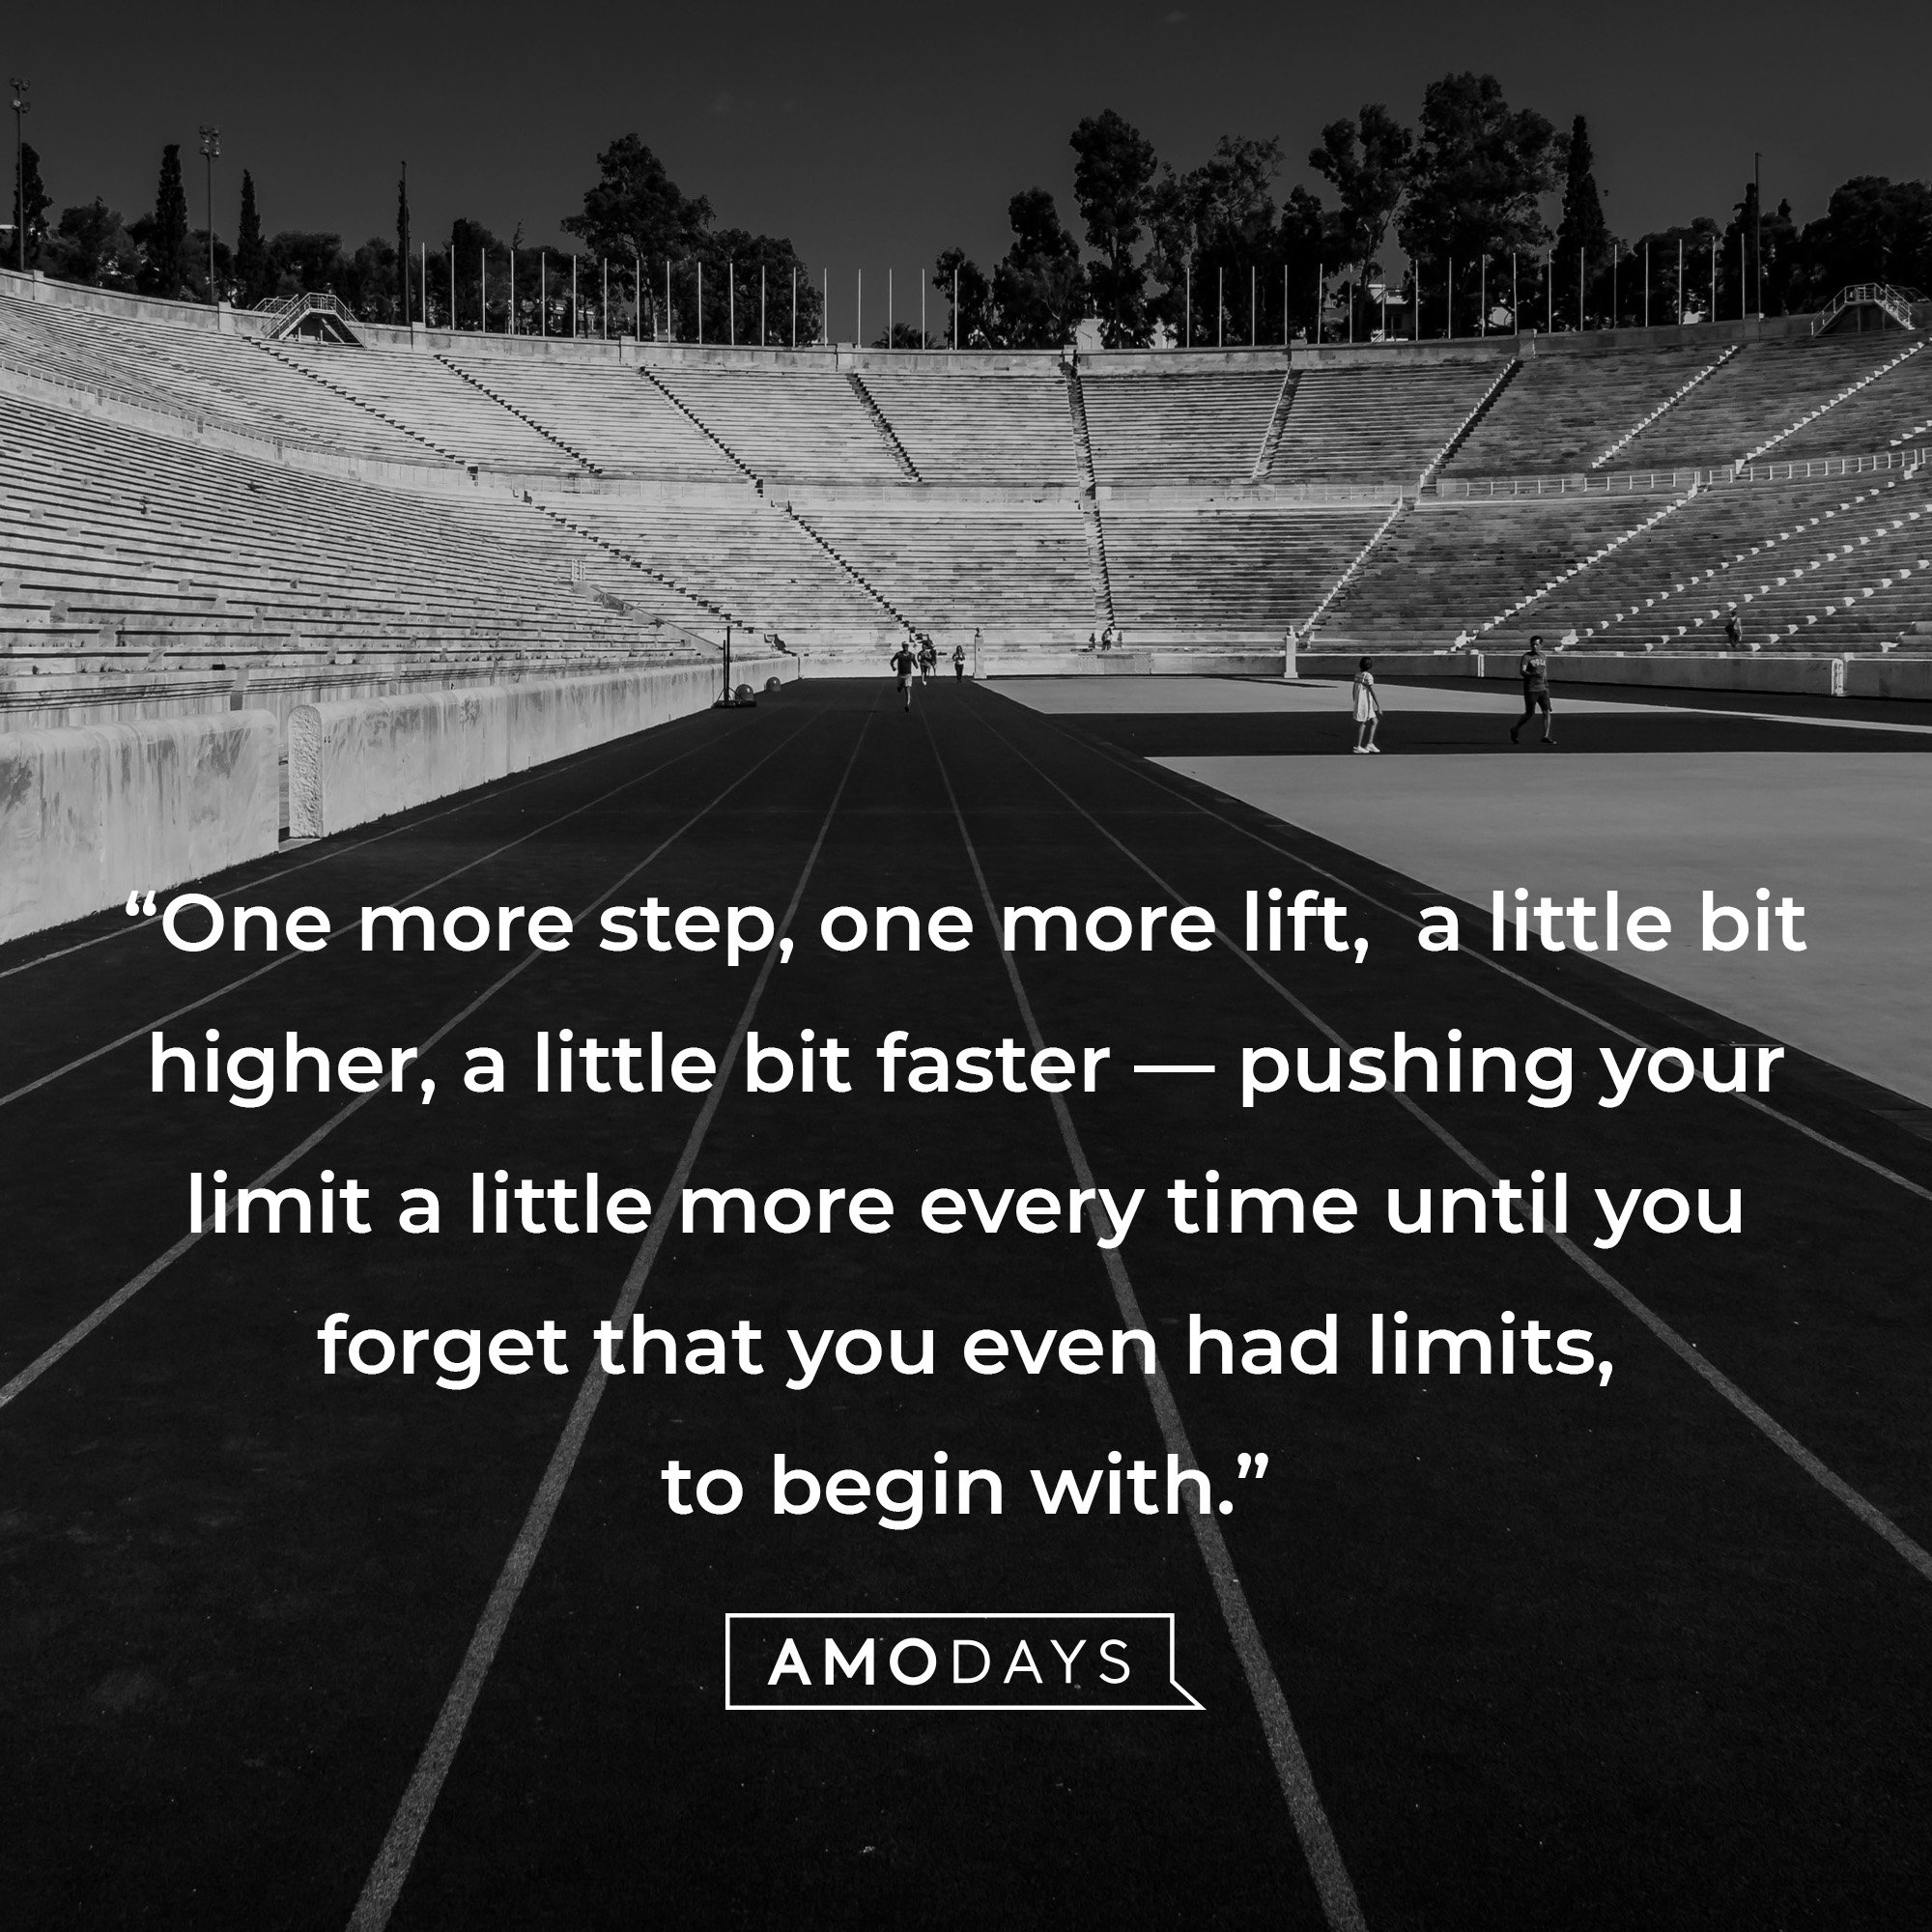 Nike’s quote: “One more step, one more lift, a little bit higher, a little bit faster — pushing your limit a little more every time until you forget you even had limits to begin with.” | Source: AmoDays